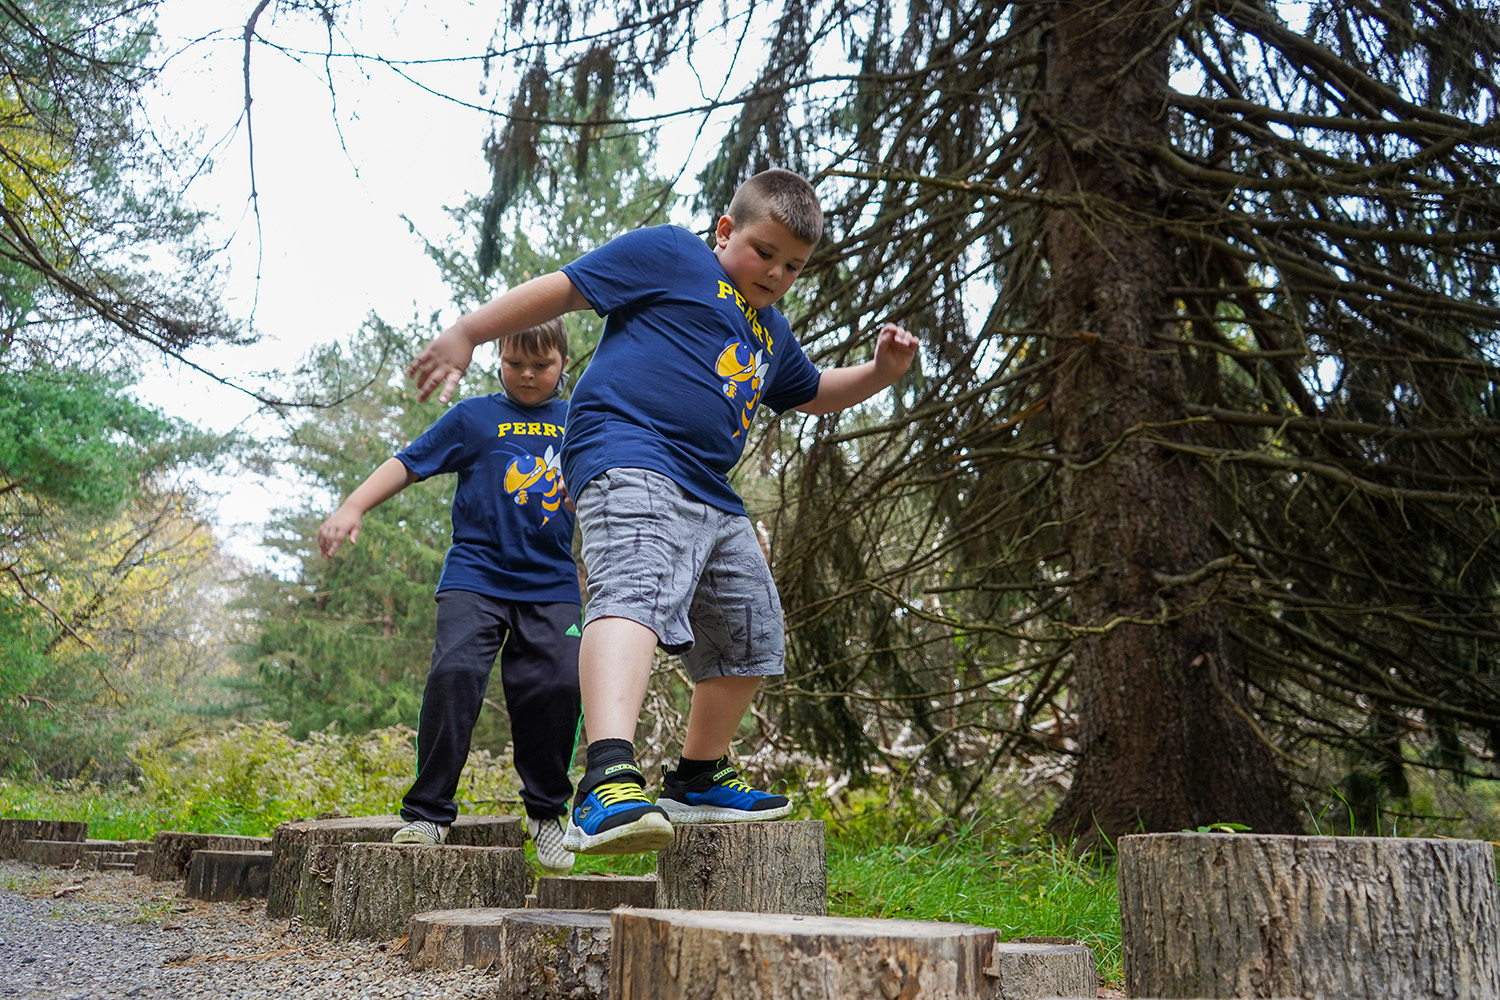 Kids playing at the Autism Nature Trail at Letchworth State Park